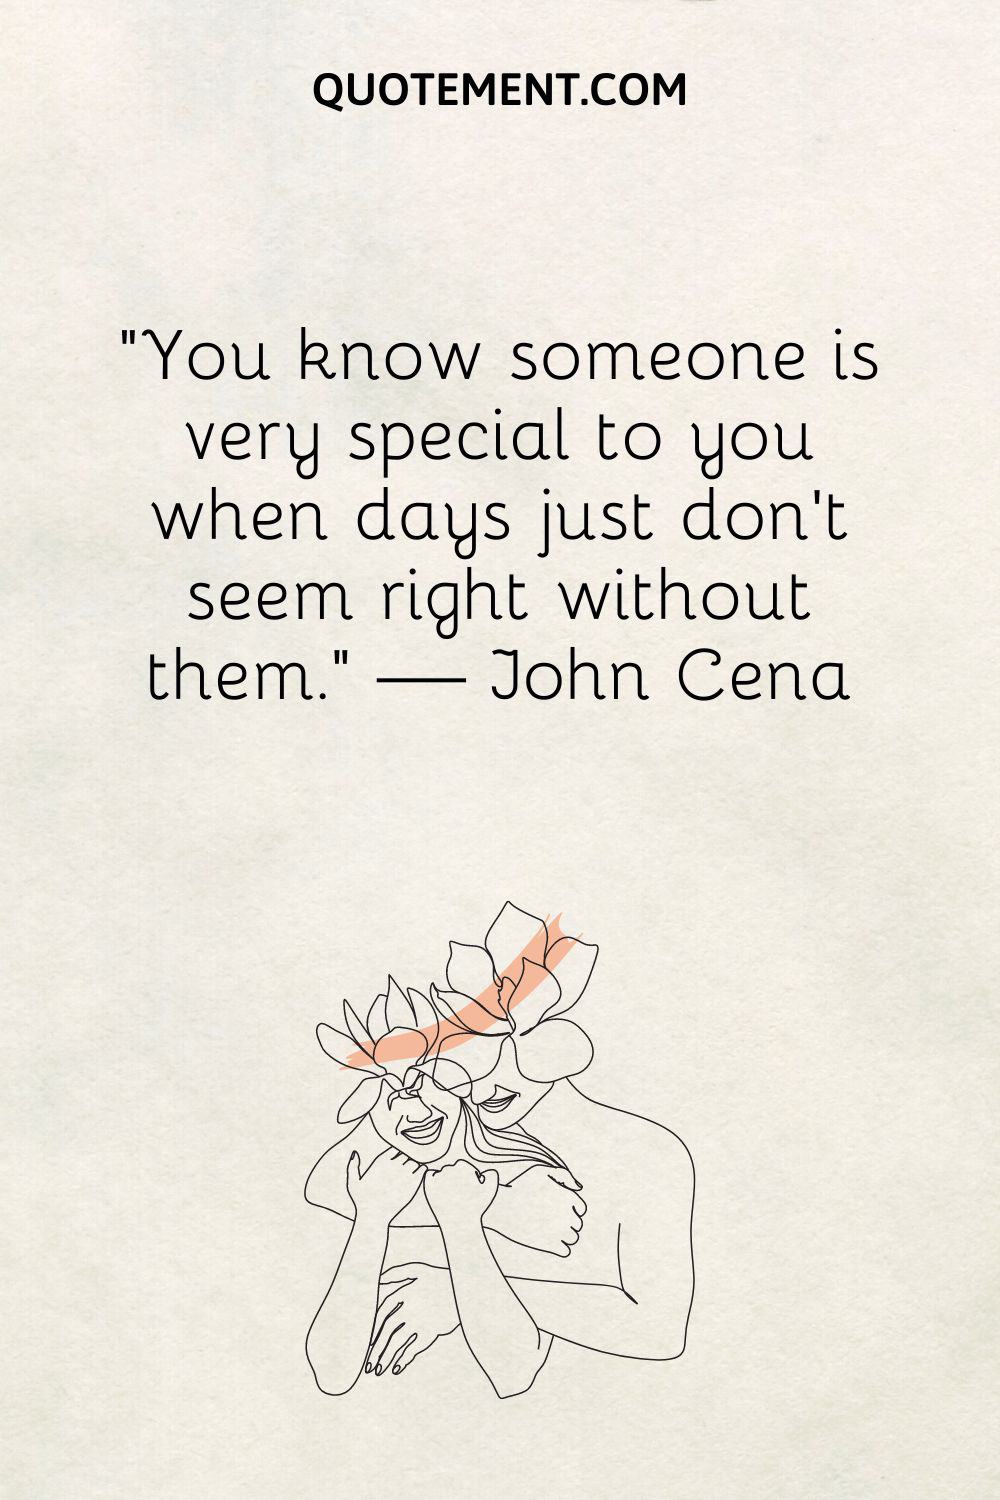 You know someone is very special to you when days just don't seem right without them